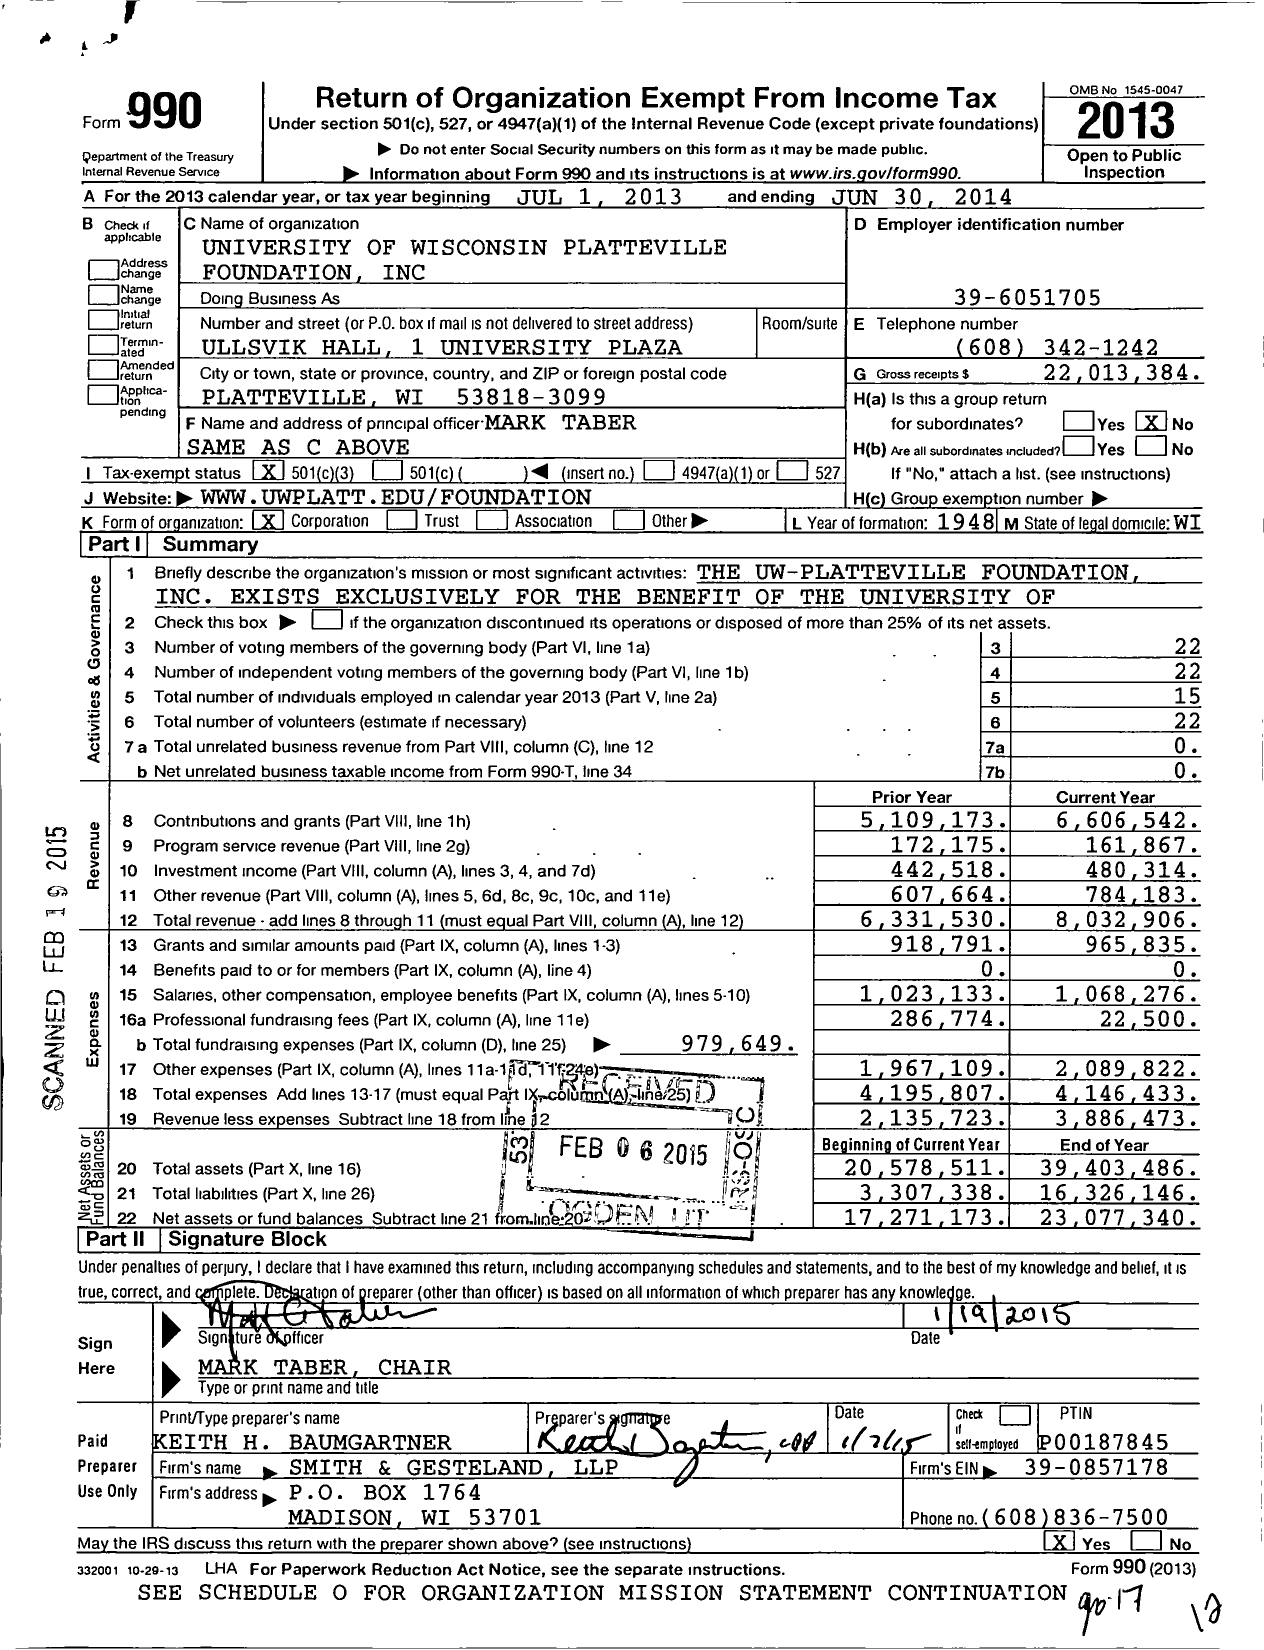 Image of first page of 2013 Form 990 for The Uw - Platteville Foundation